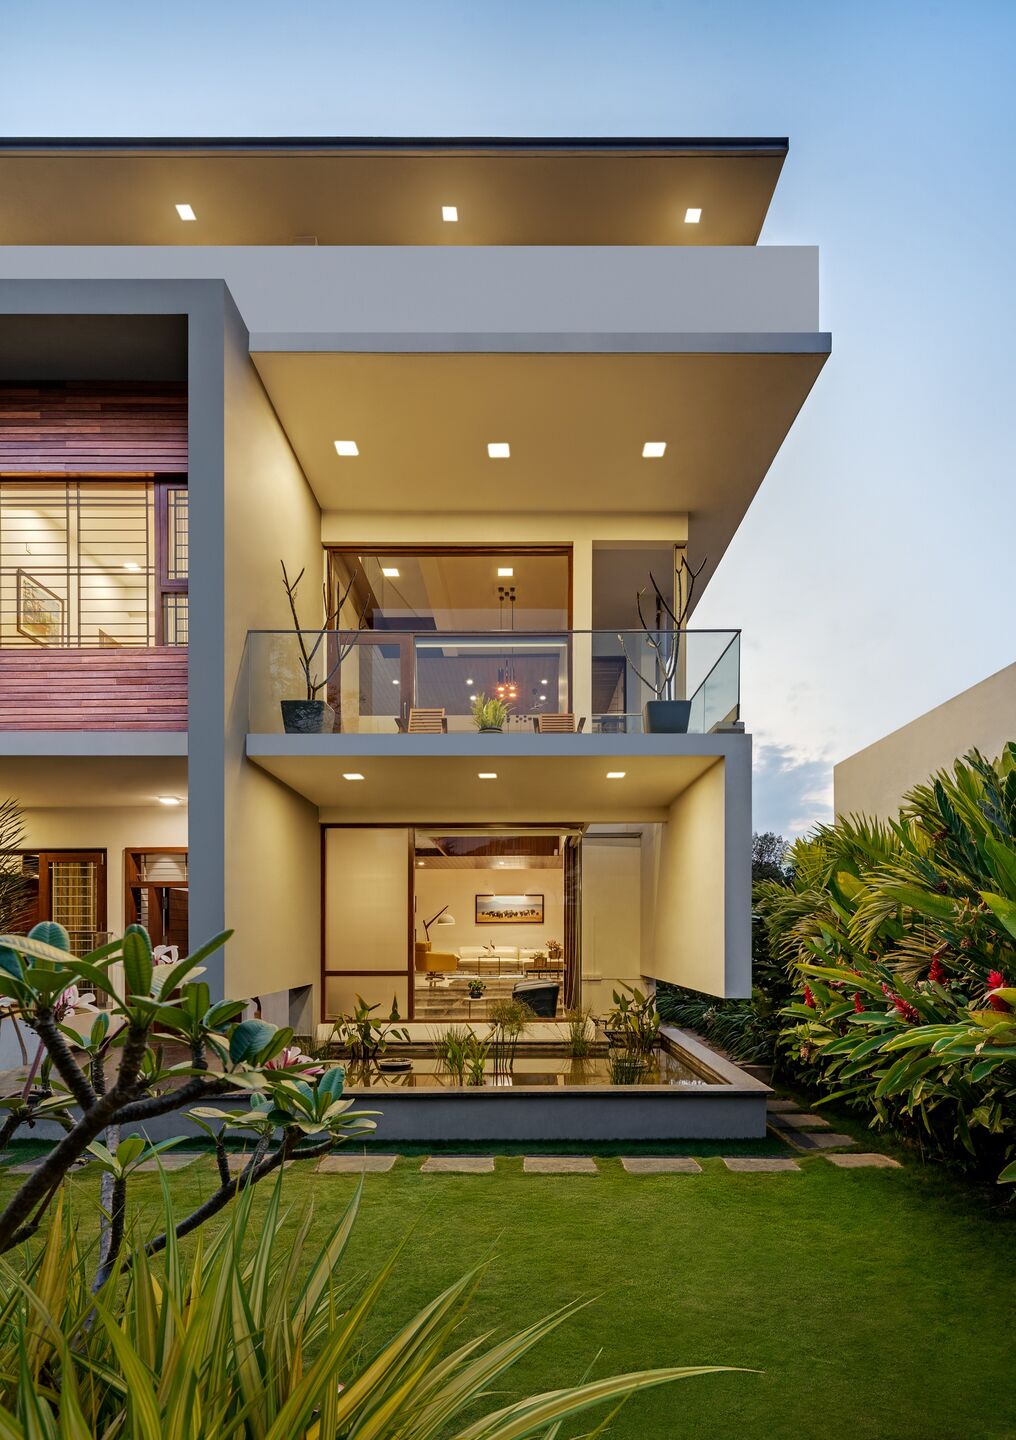 Indian Modern House Plan Designs With